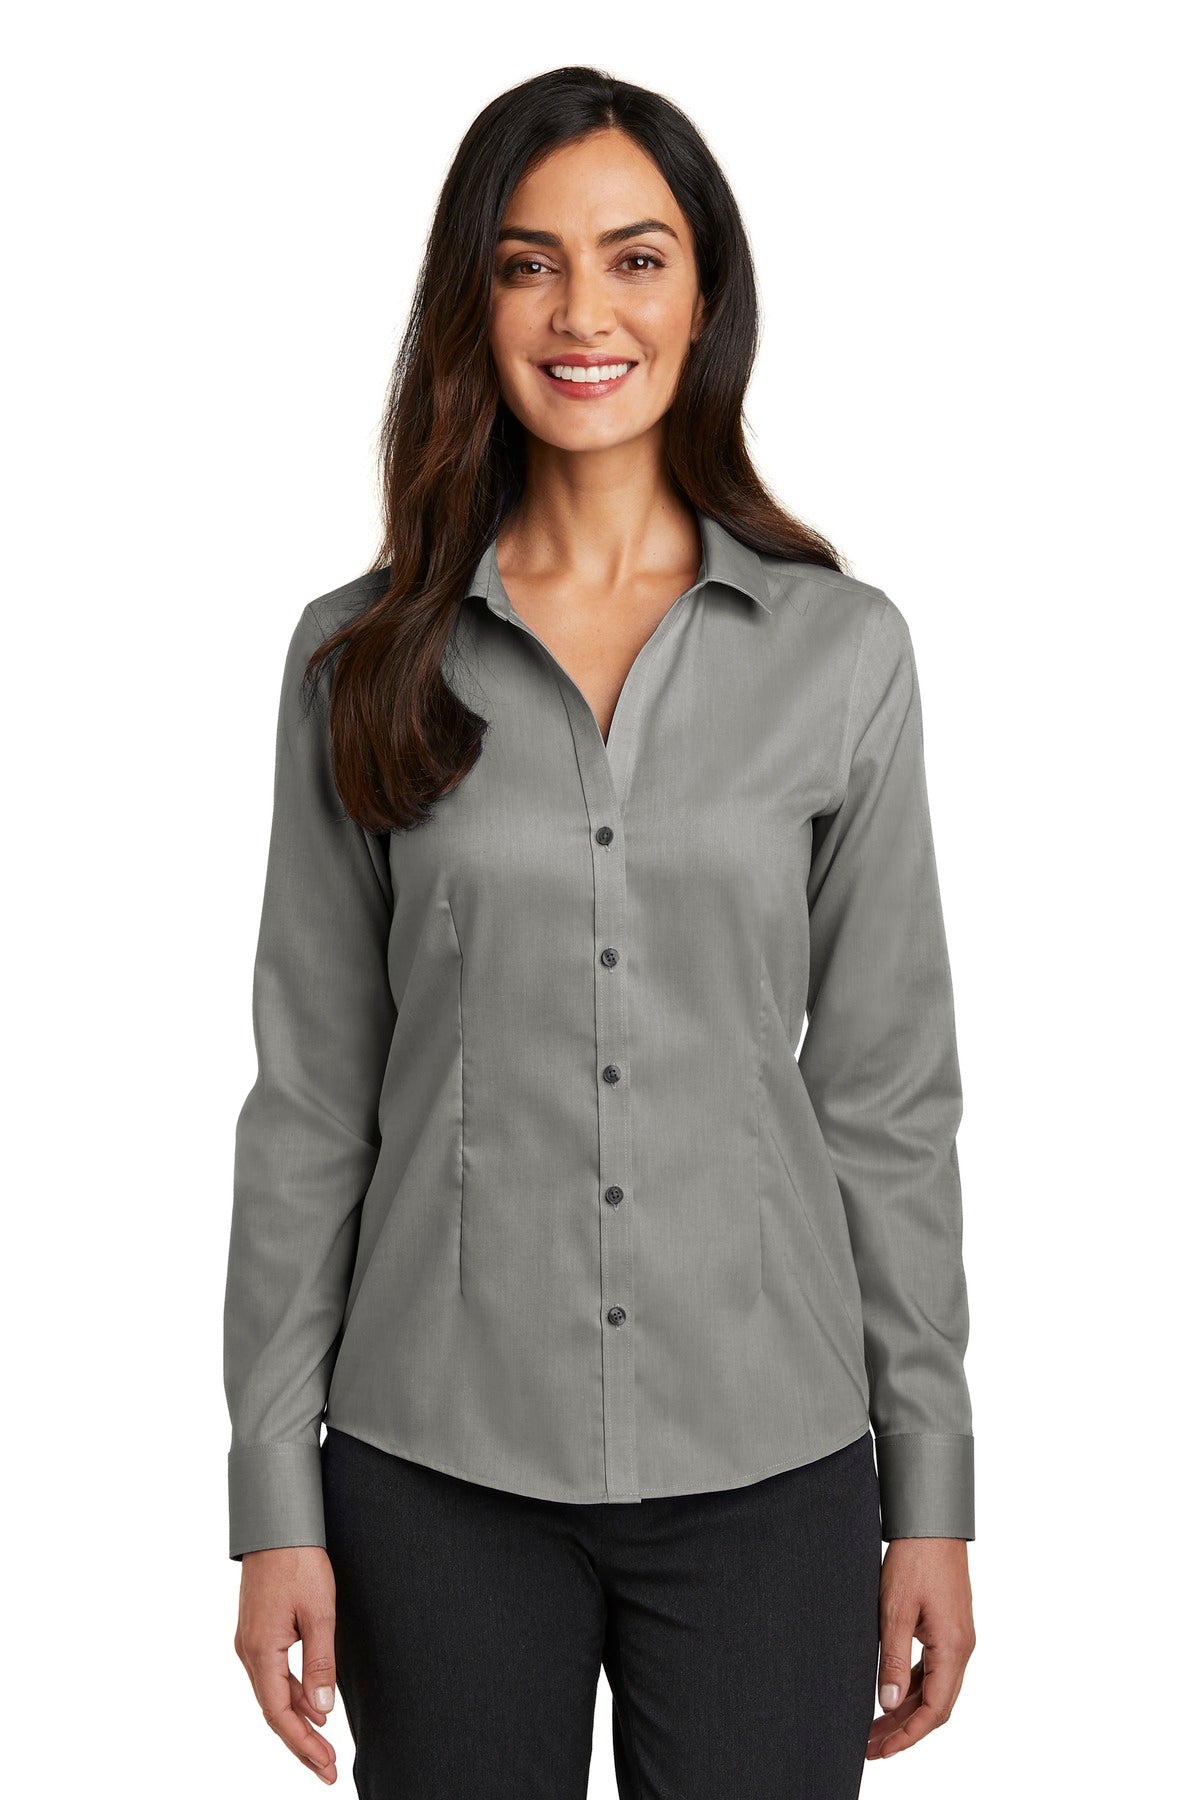 Red House Ladies Pinpoint Oxford Non-Iron Shirt. RH250